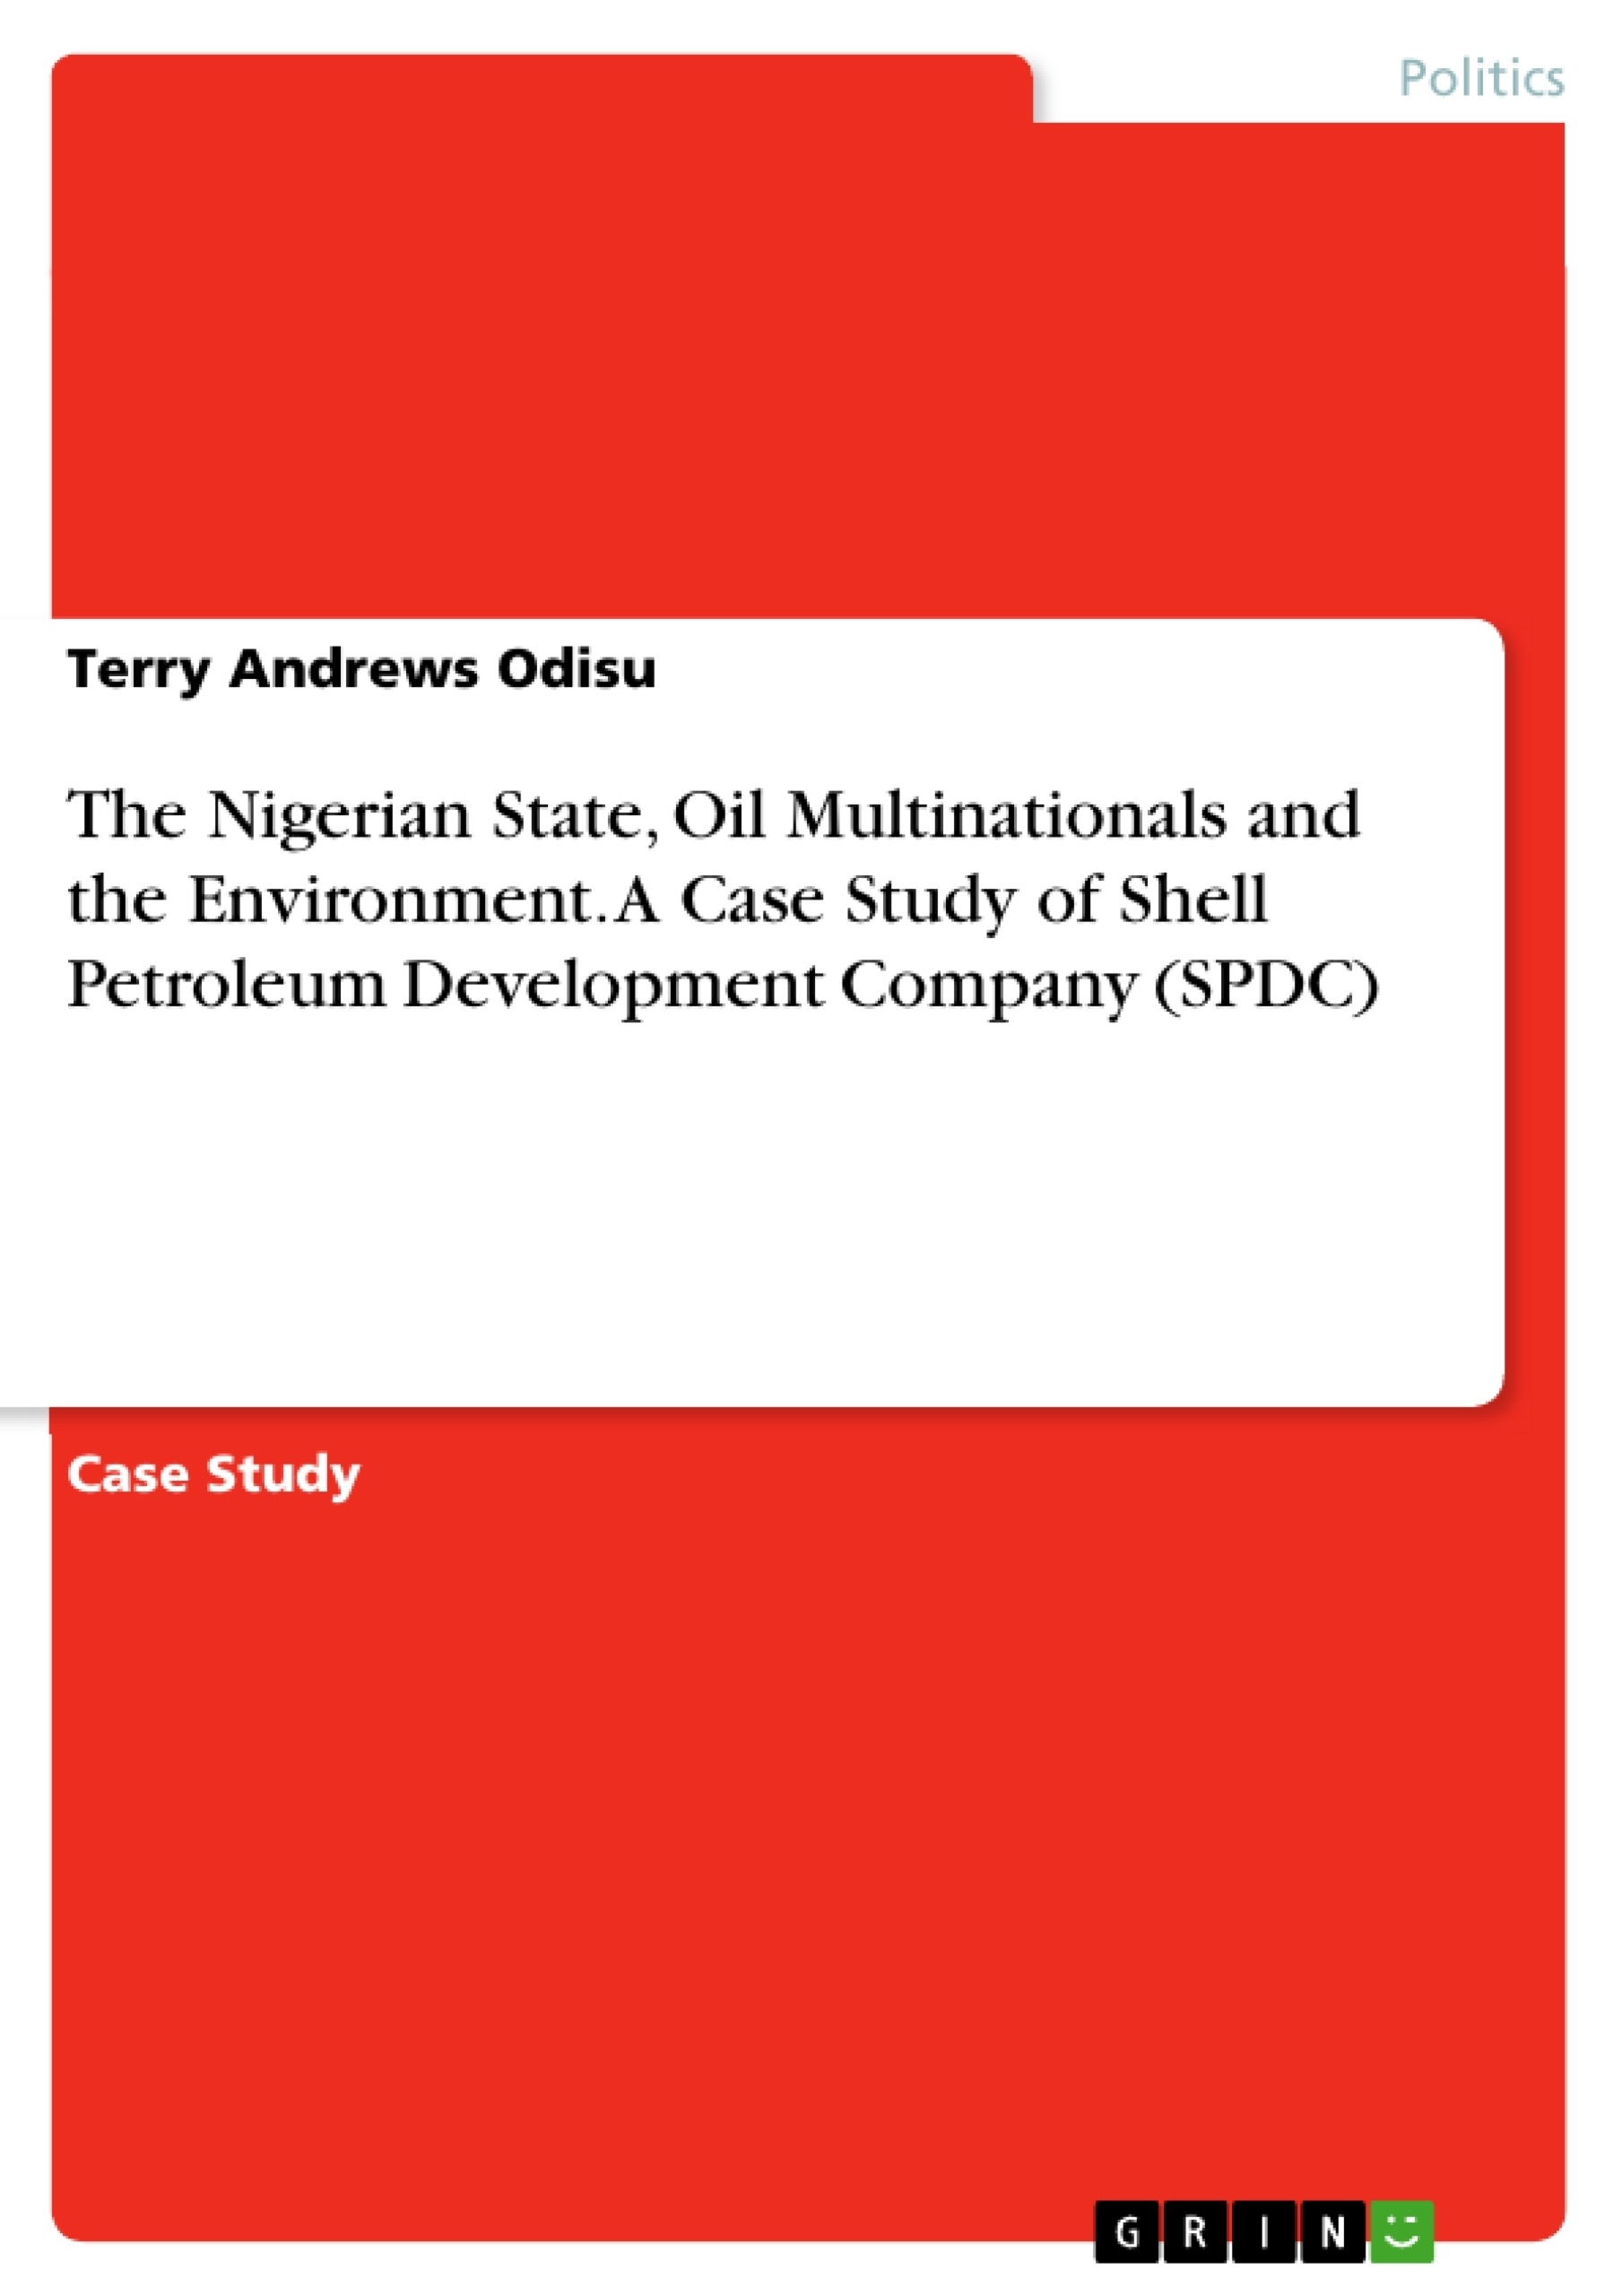 Titre: The Nigerian State, Oil Multinationals and the Environment. A Case Study of Shell Petroleum Development Company (SPDC)